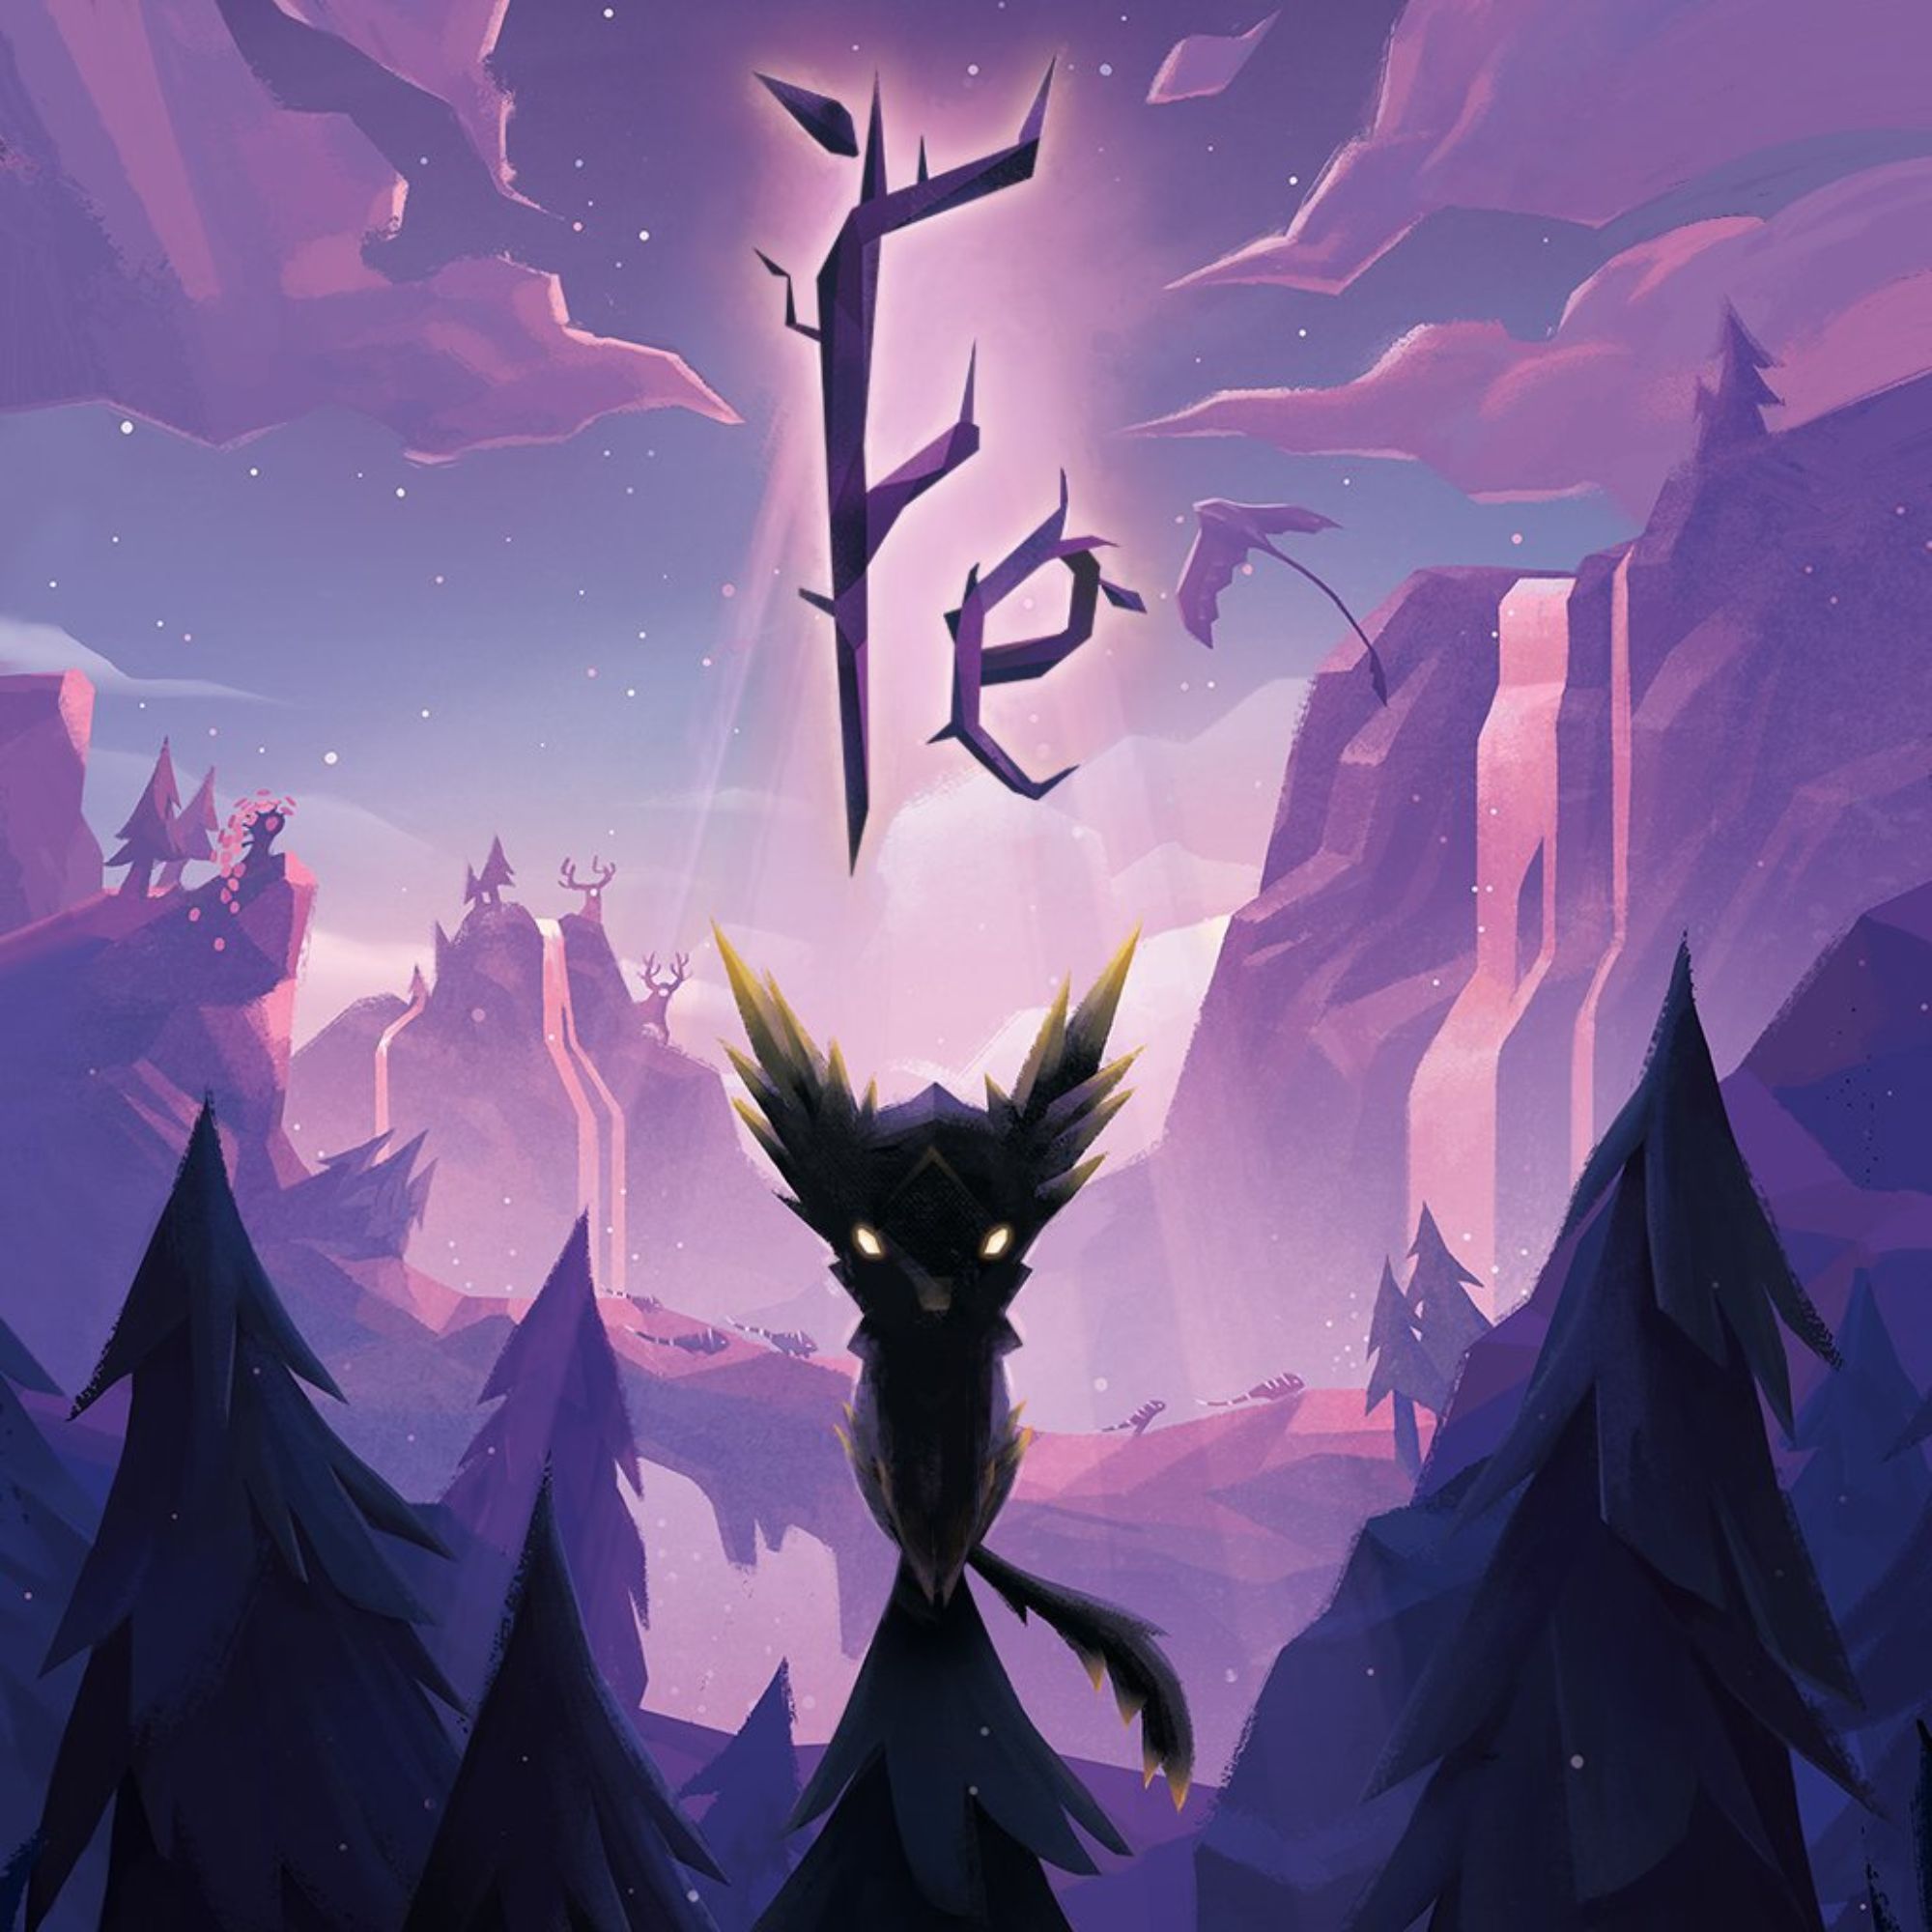 2000x2000 tag cover for Fe showing a creature standing in a purple hue forest